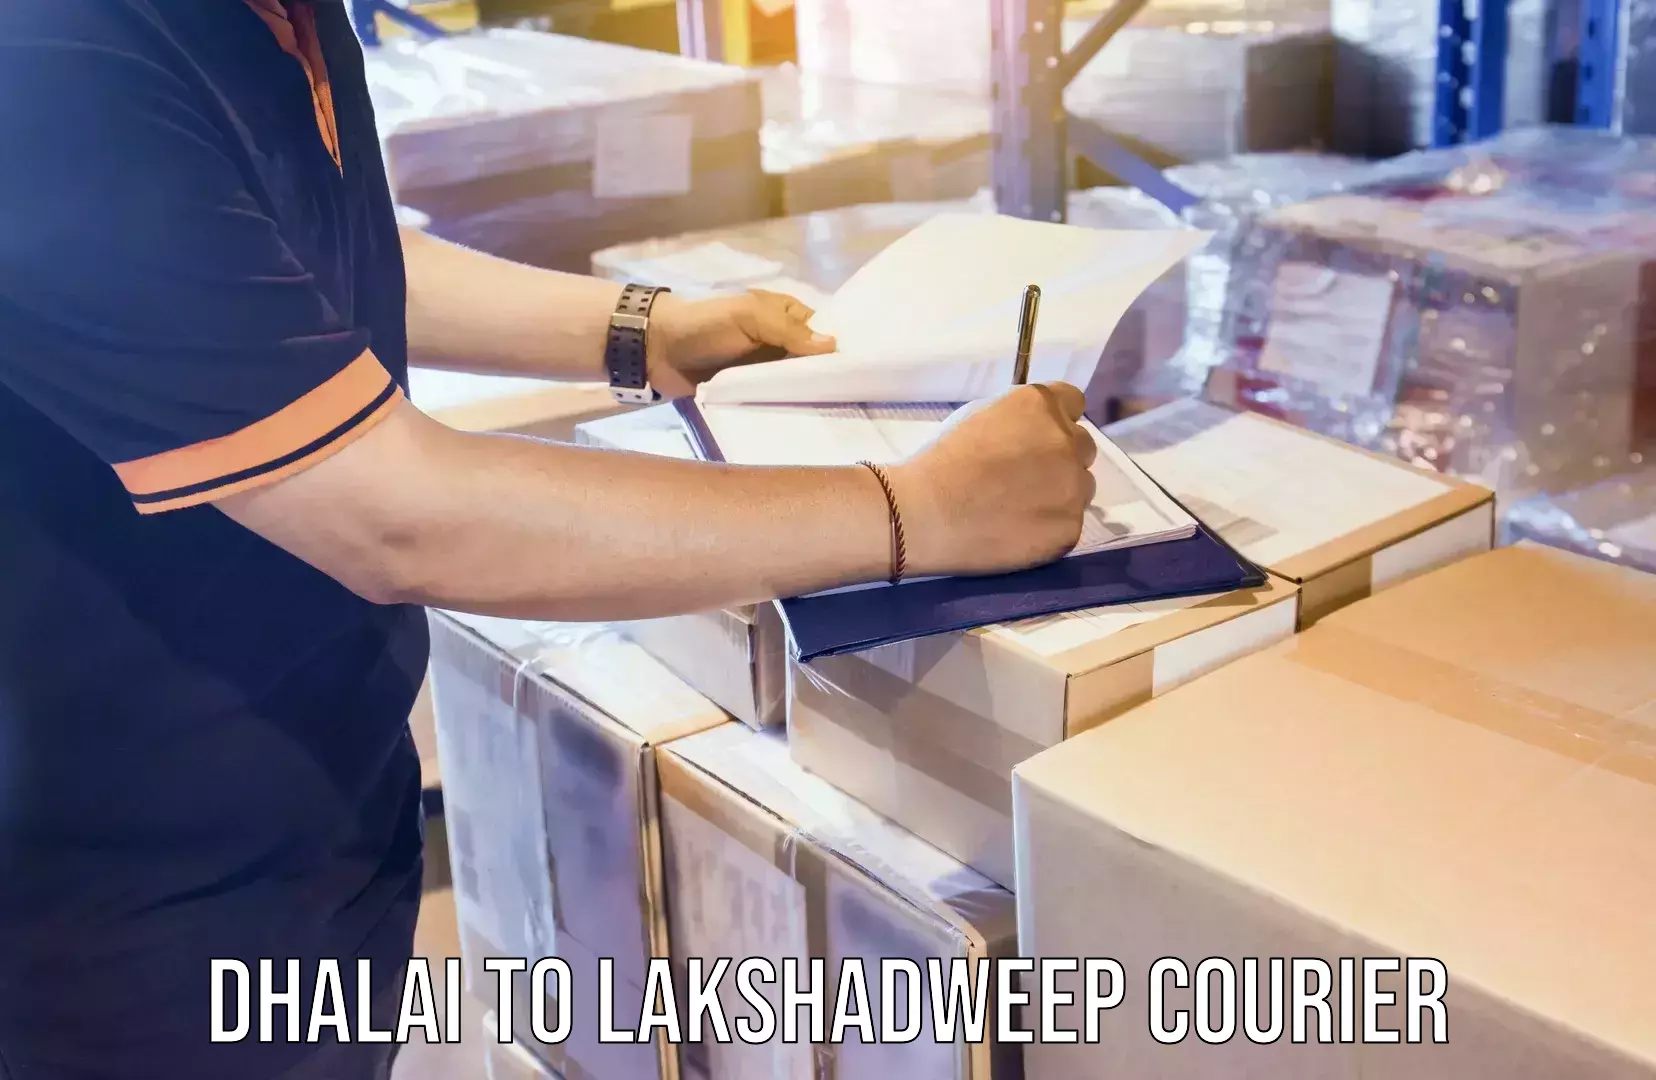 Next-day delivery options Dhalai to Lakshadweep